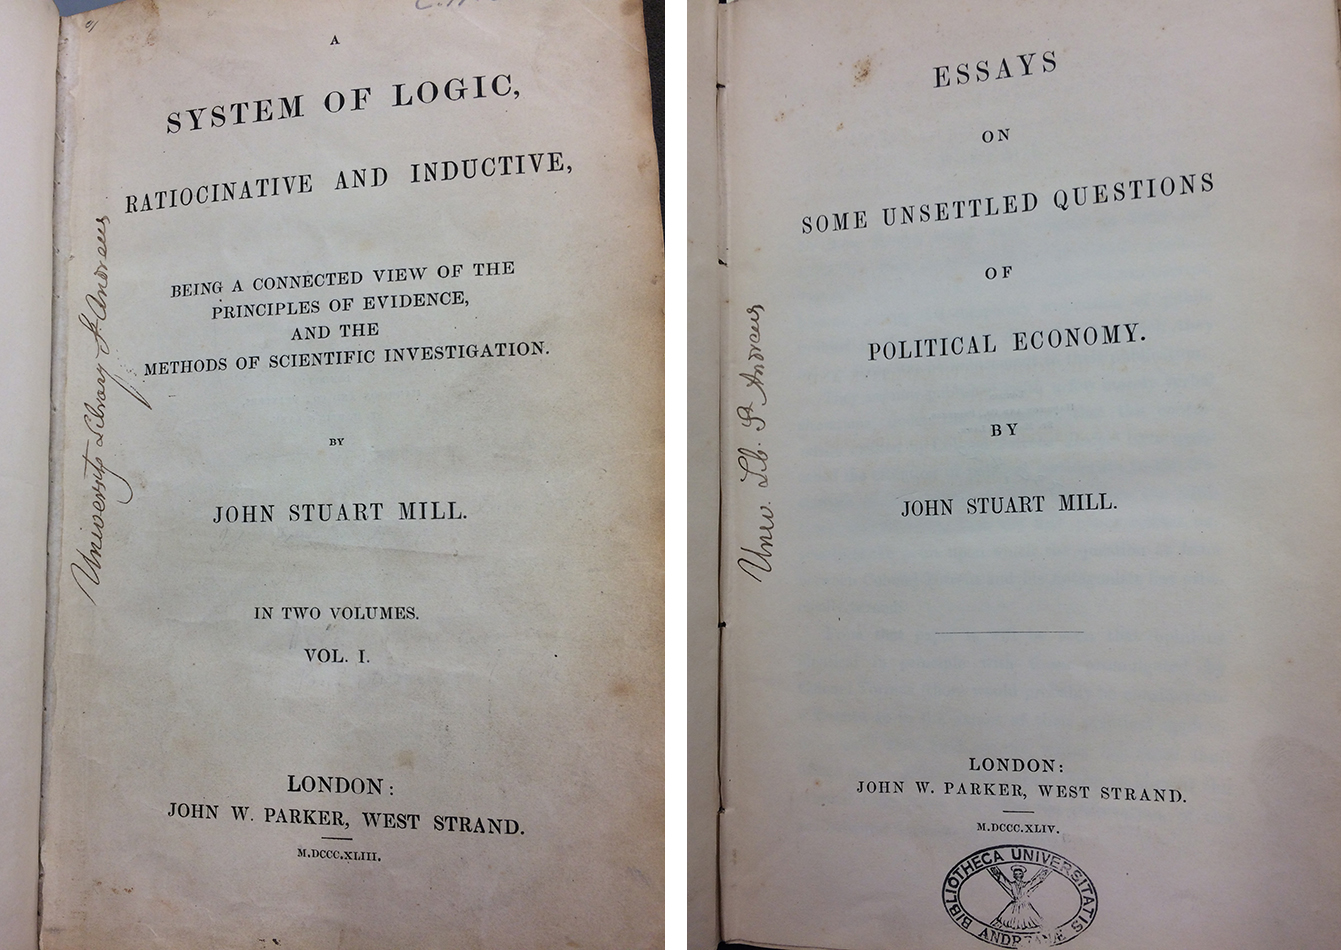 First editions of two of Mill’s seminal works: A system of logic, rationcinative and inductive, being, a connected view of the principles of evidence and the methods of scientific investigation (1843) s BC71.M5E43 and Mill, Essays on some unsettled questions of political economy (1844) r HB161.M6E44